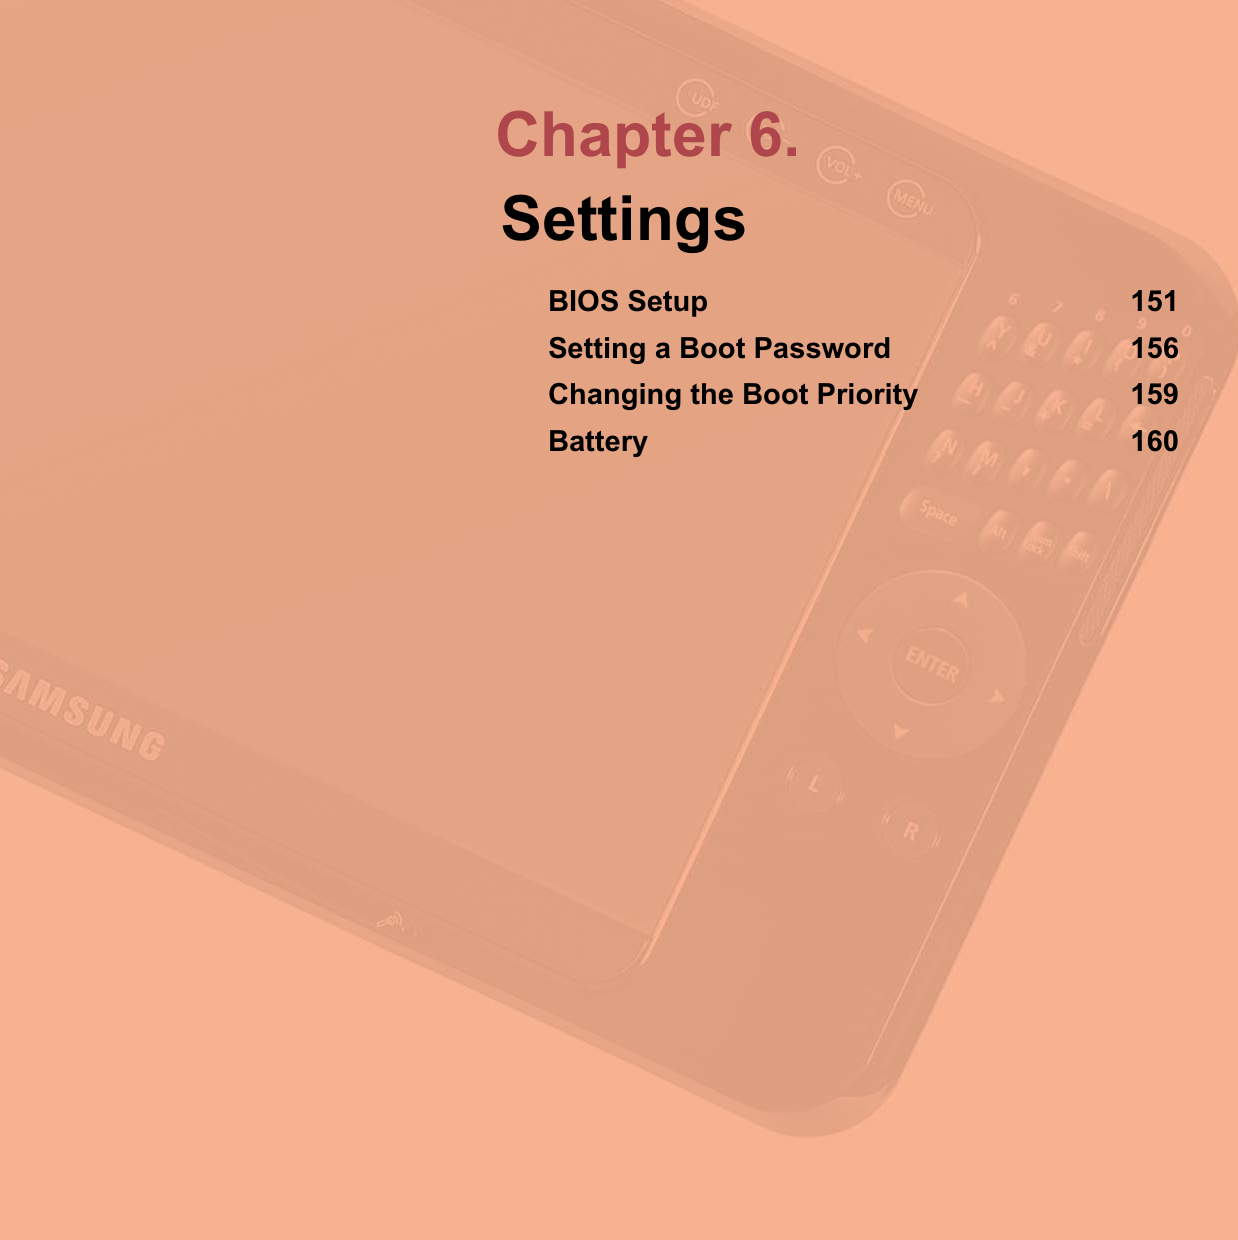 Chapter 6.SettingsBIOS Setup 151Setting a Boot Password 156Changing the Boot Priority 159Battery 160